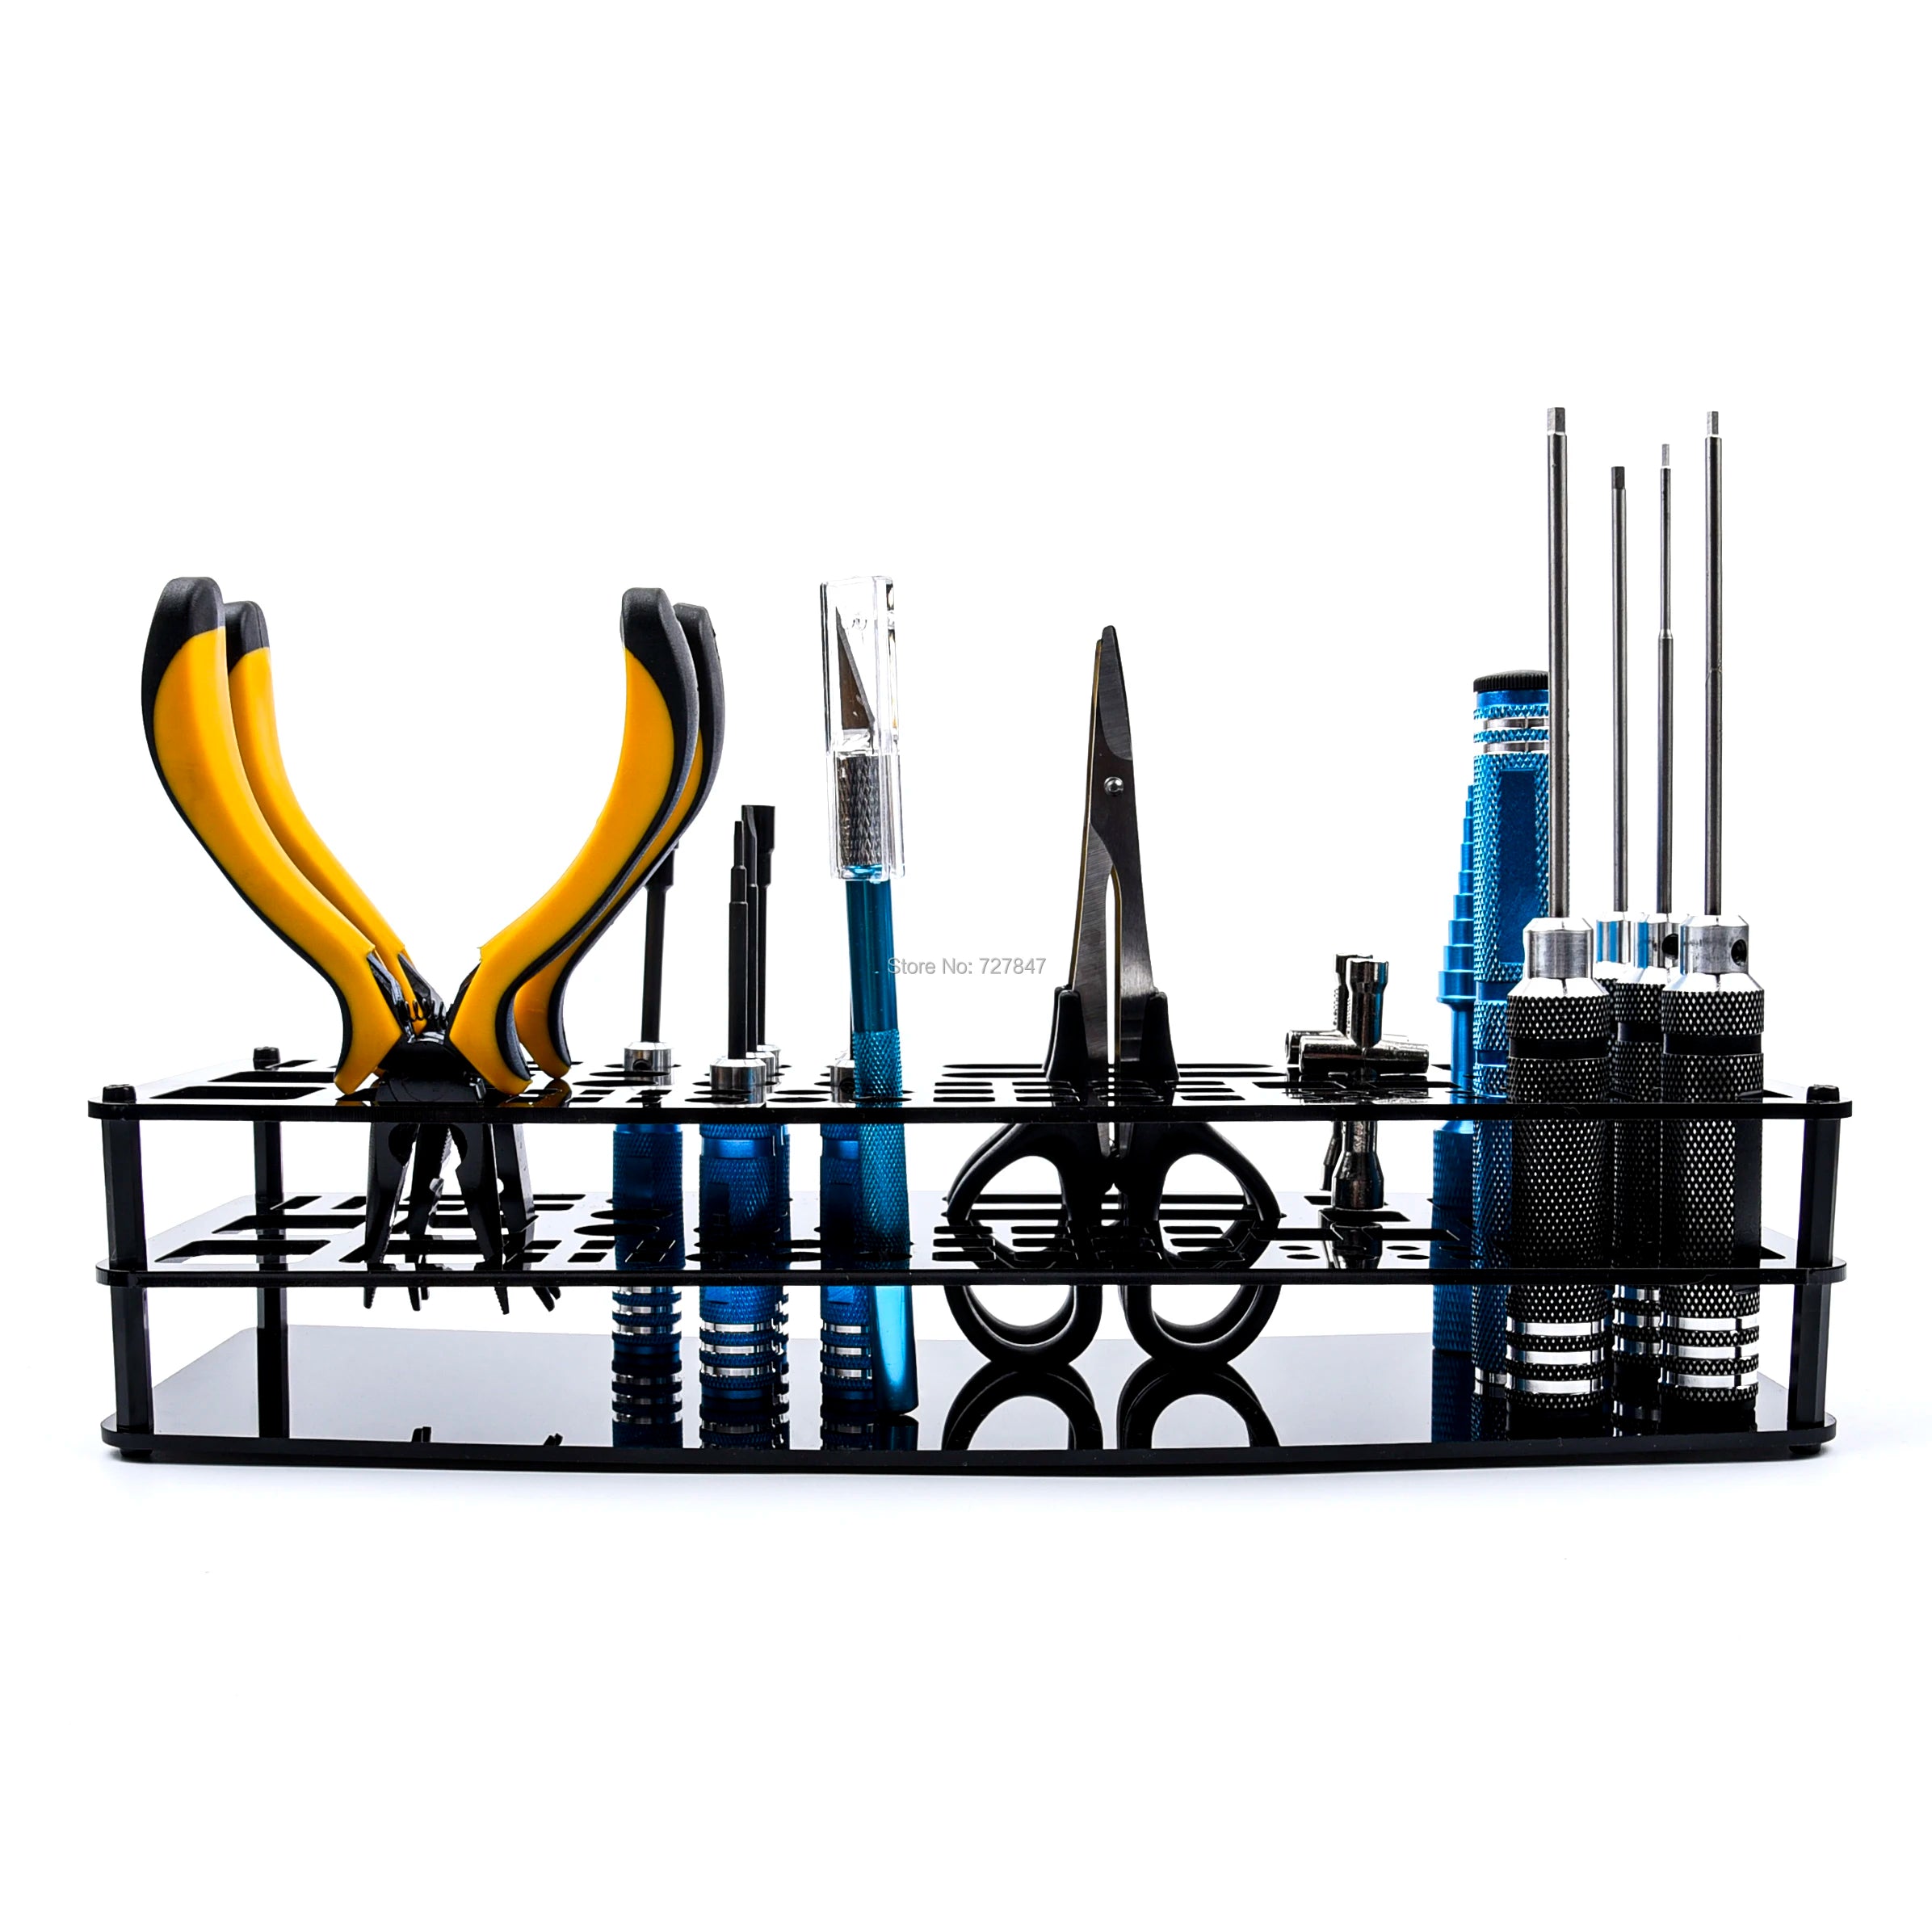 63 Hole Screwdriver Storage Rack Holder, the tool storage rack helps keep your screwdrivers, Wire Cutter, Pliers